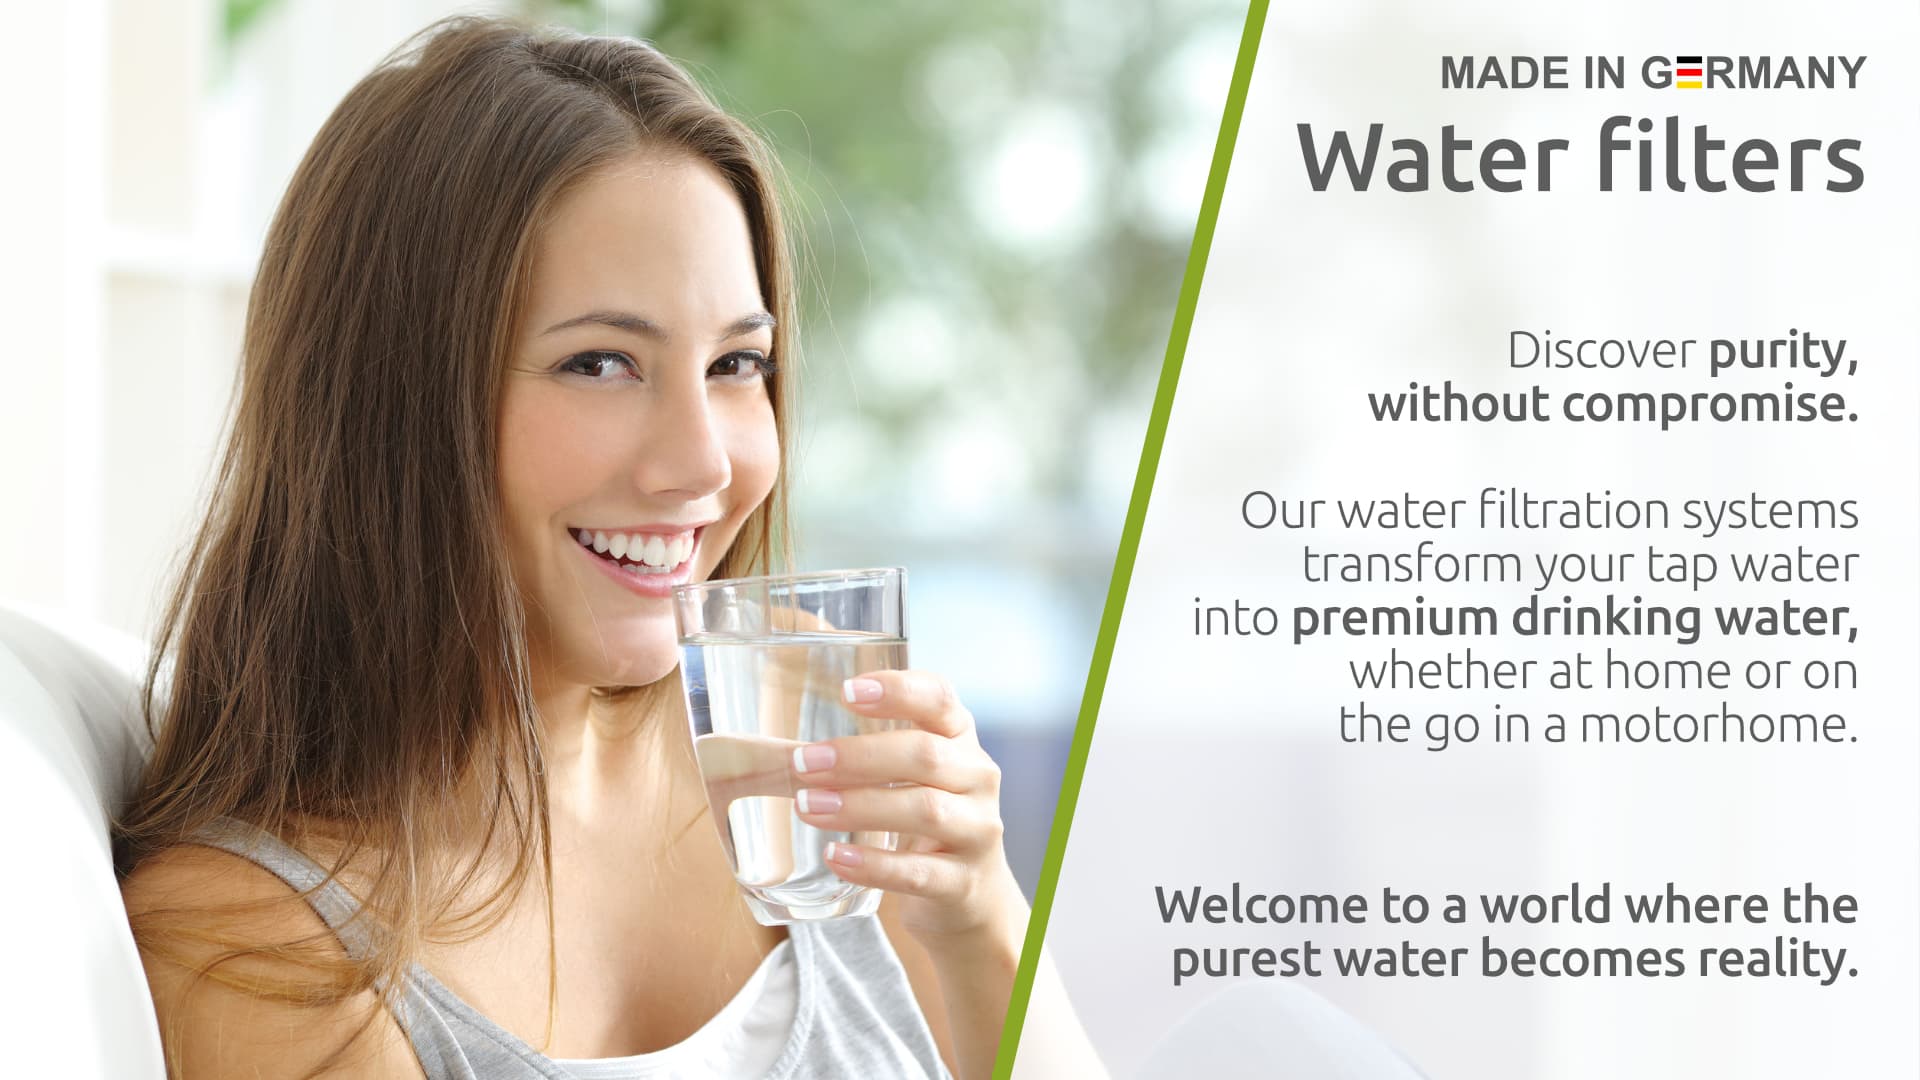 Water Filters – Made in Germany. Discover purity, without compromise. Our water filtration systems transform your tap water into premium drinking water, whether at home or on the go in a motorhome. Welcome to a world where the purest water becomes reality